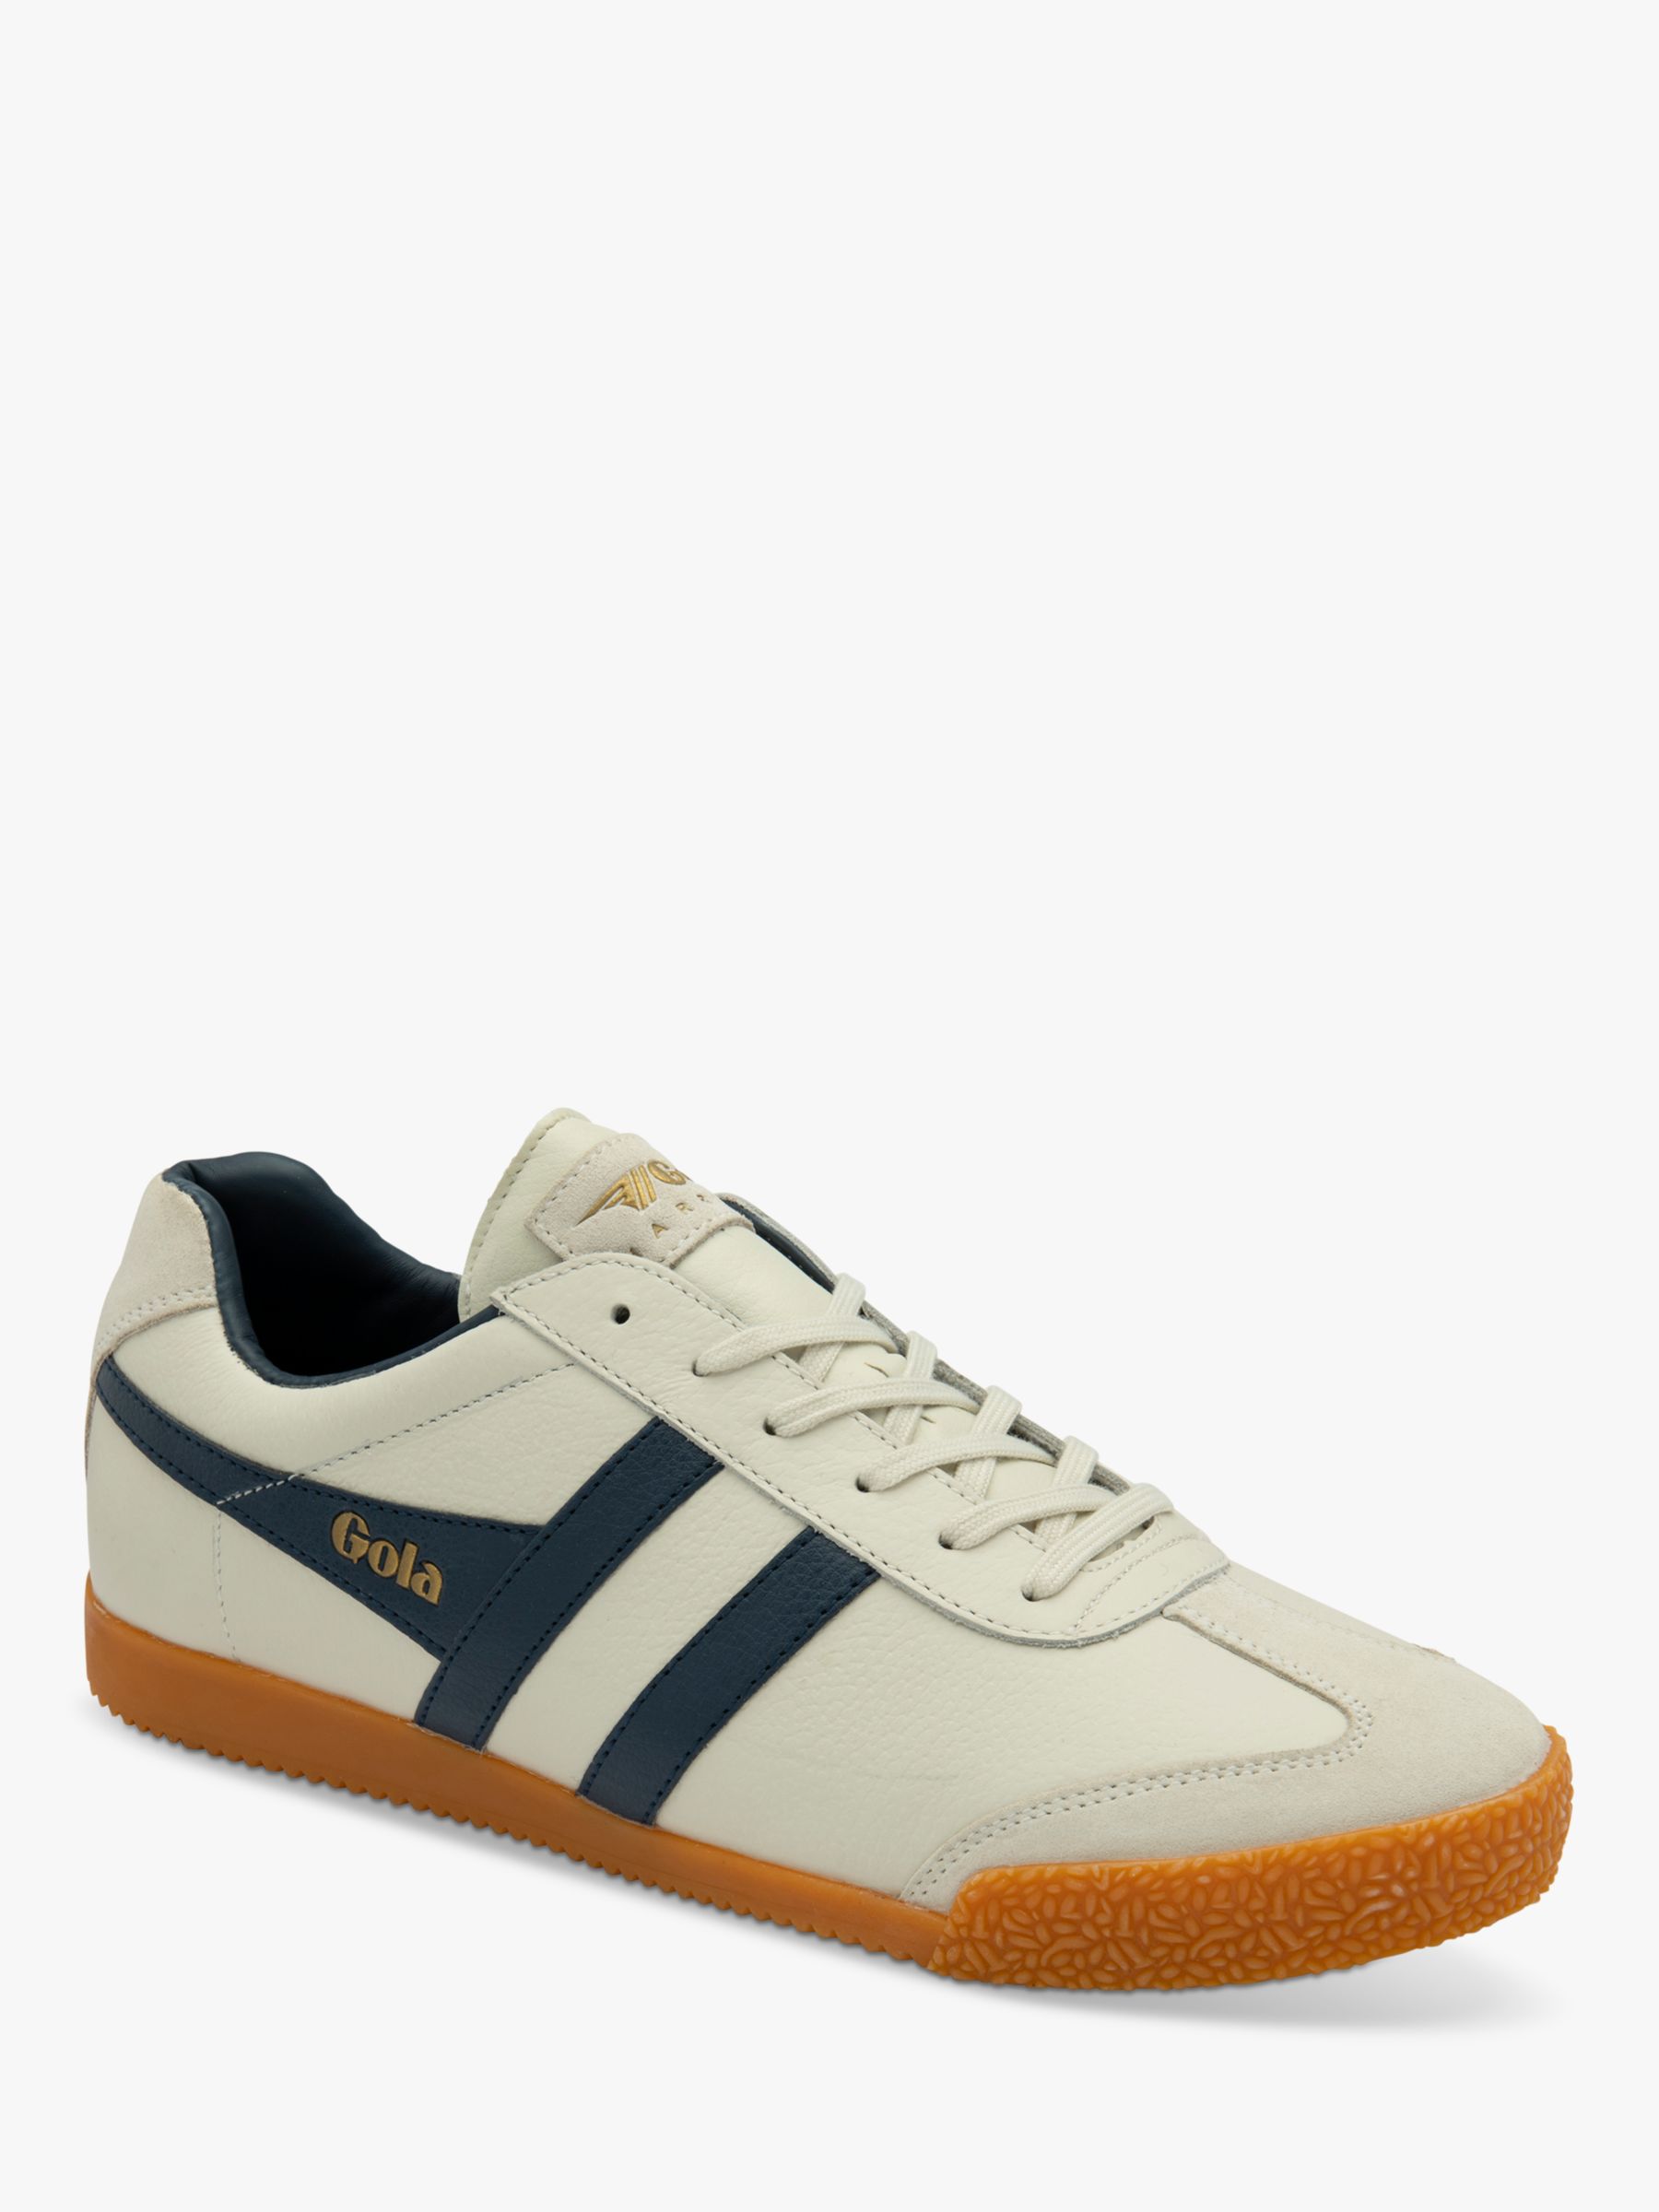 Gola Classics Harrier Leather Lace Up Trainers, Off White/Navy, 12